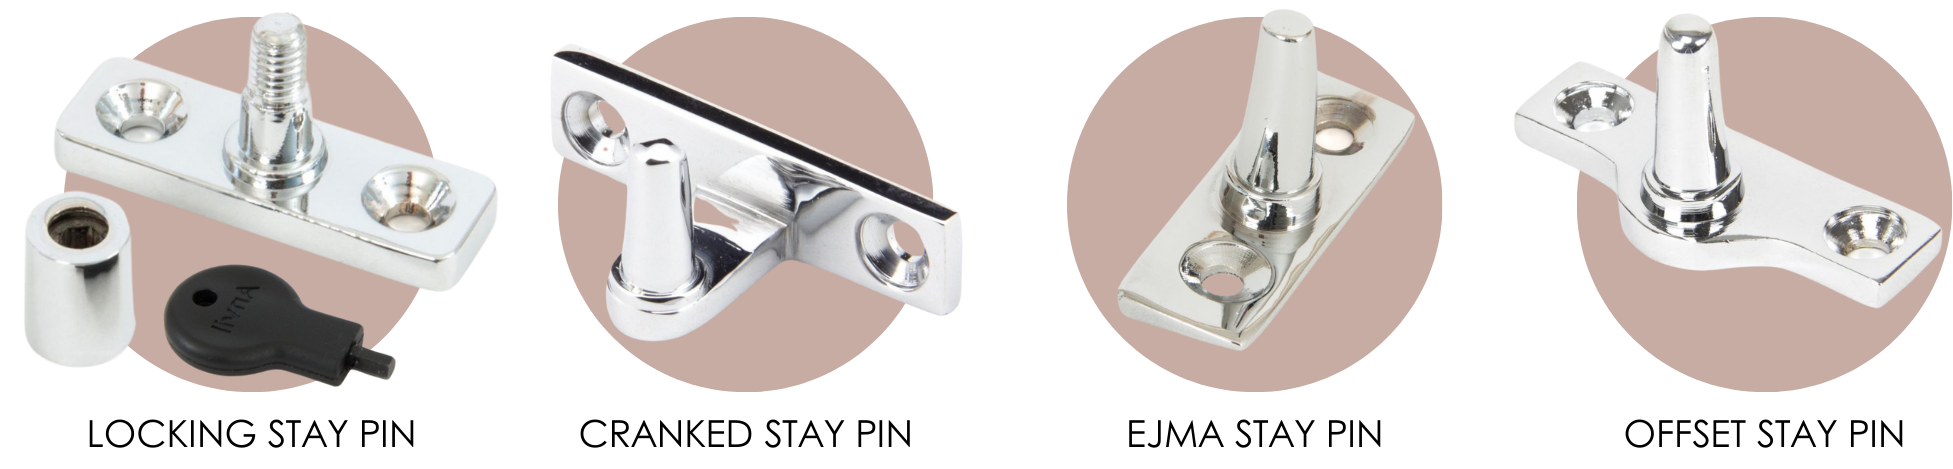 Diagram of From The Anvil's locking stay pin, cranked stay pin, EJMA stay pin, and offset stay pin.